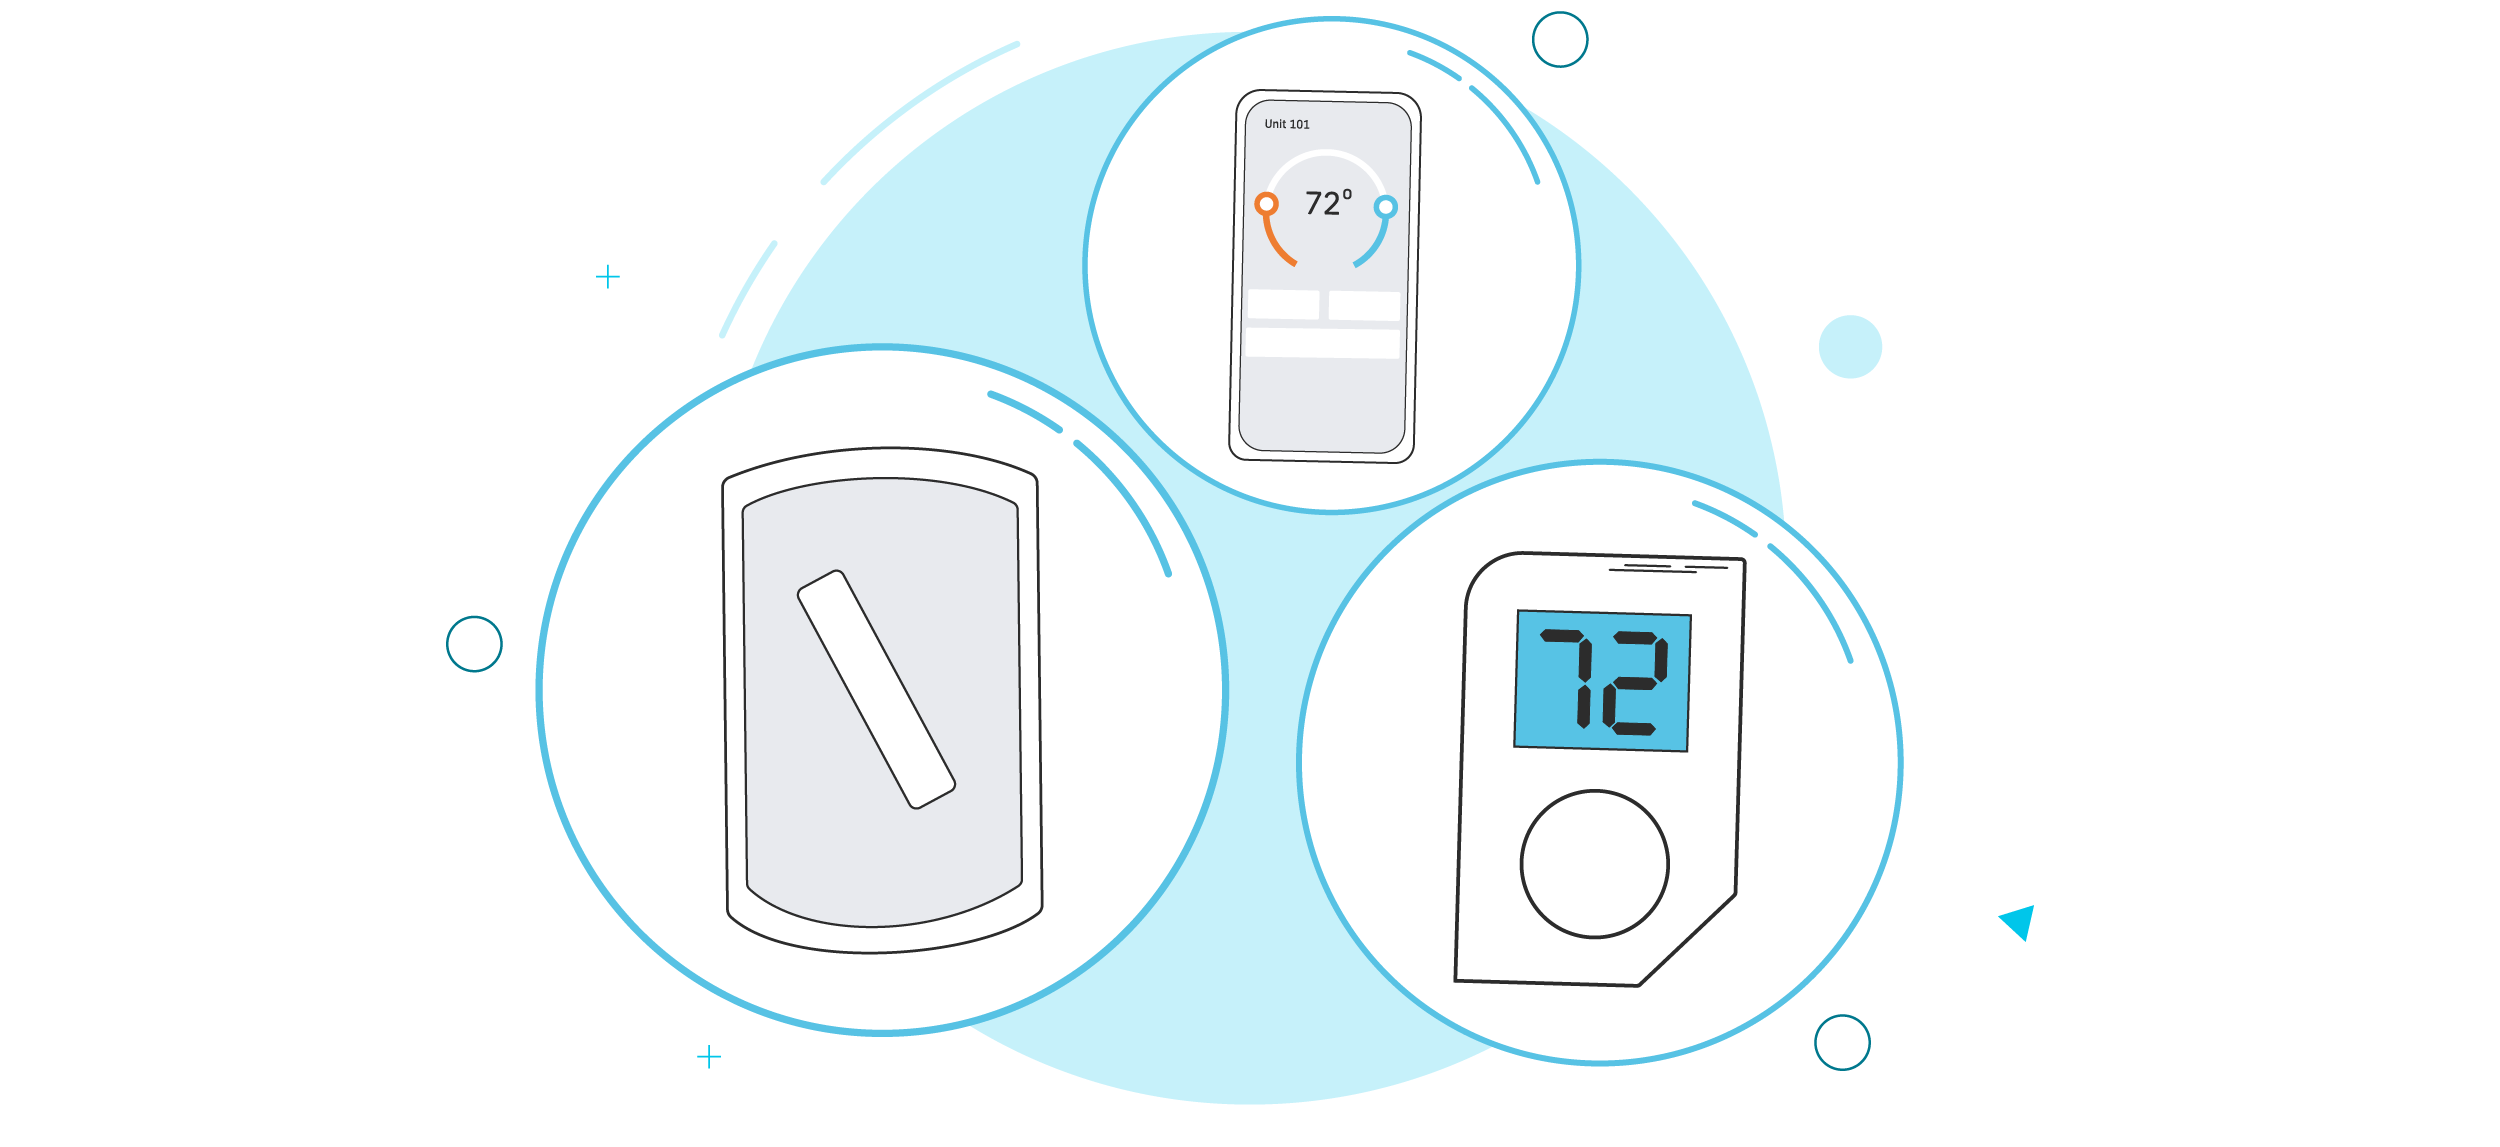 An illustration of smart devices used in Quext's IoT solution.